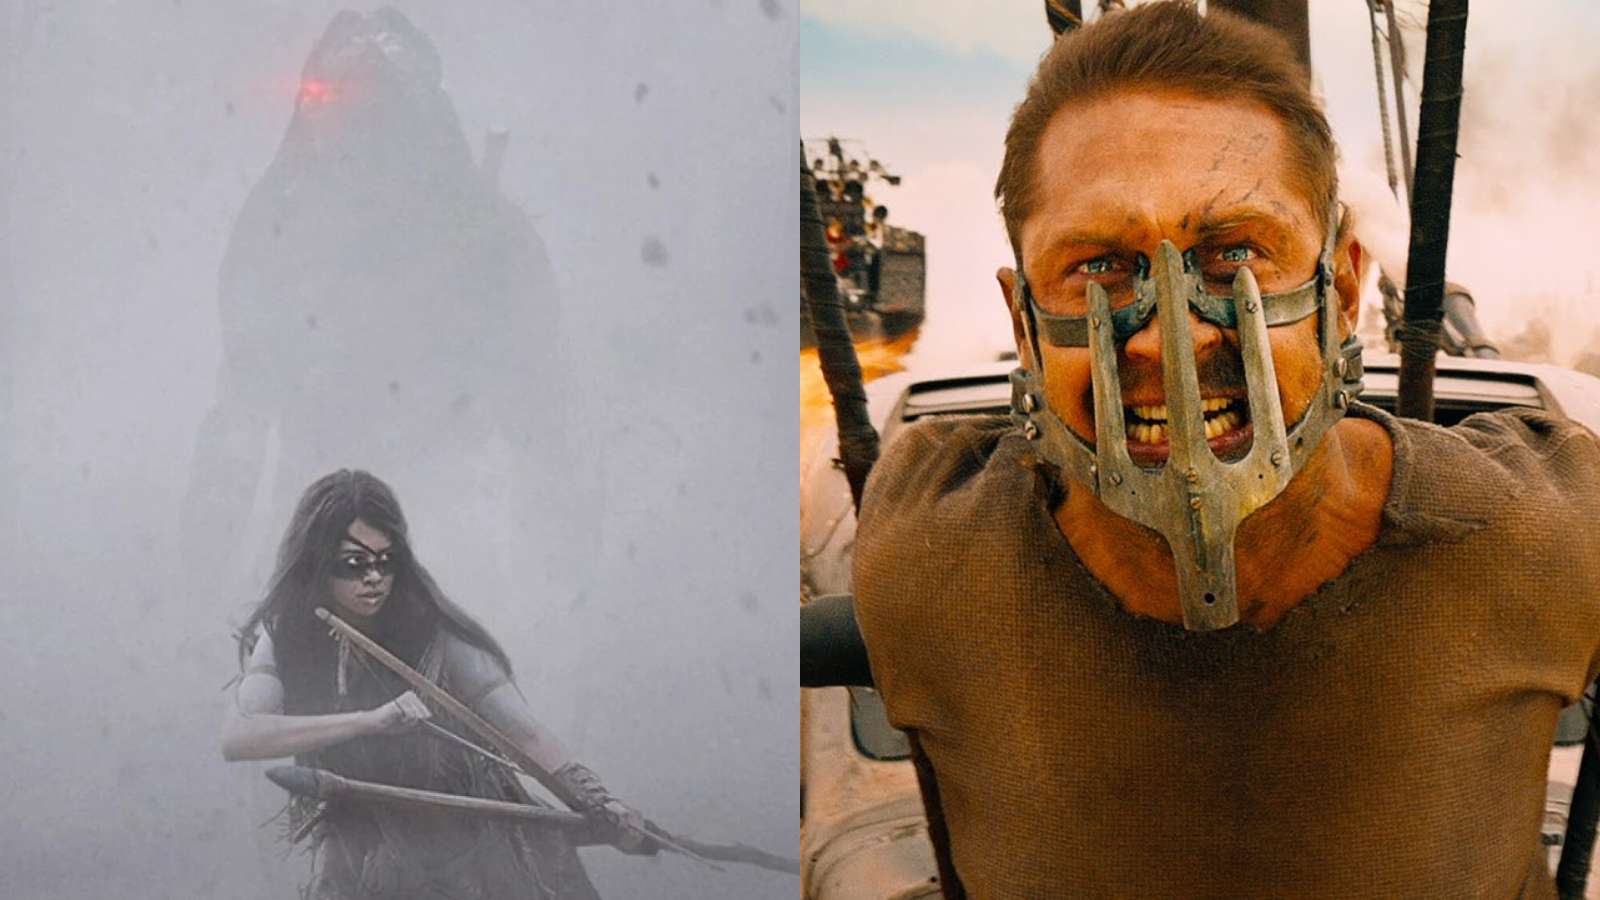 An image of the Prey Predator prequel poster and Mad Max: Fury Road